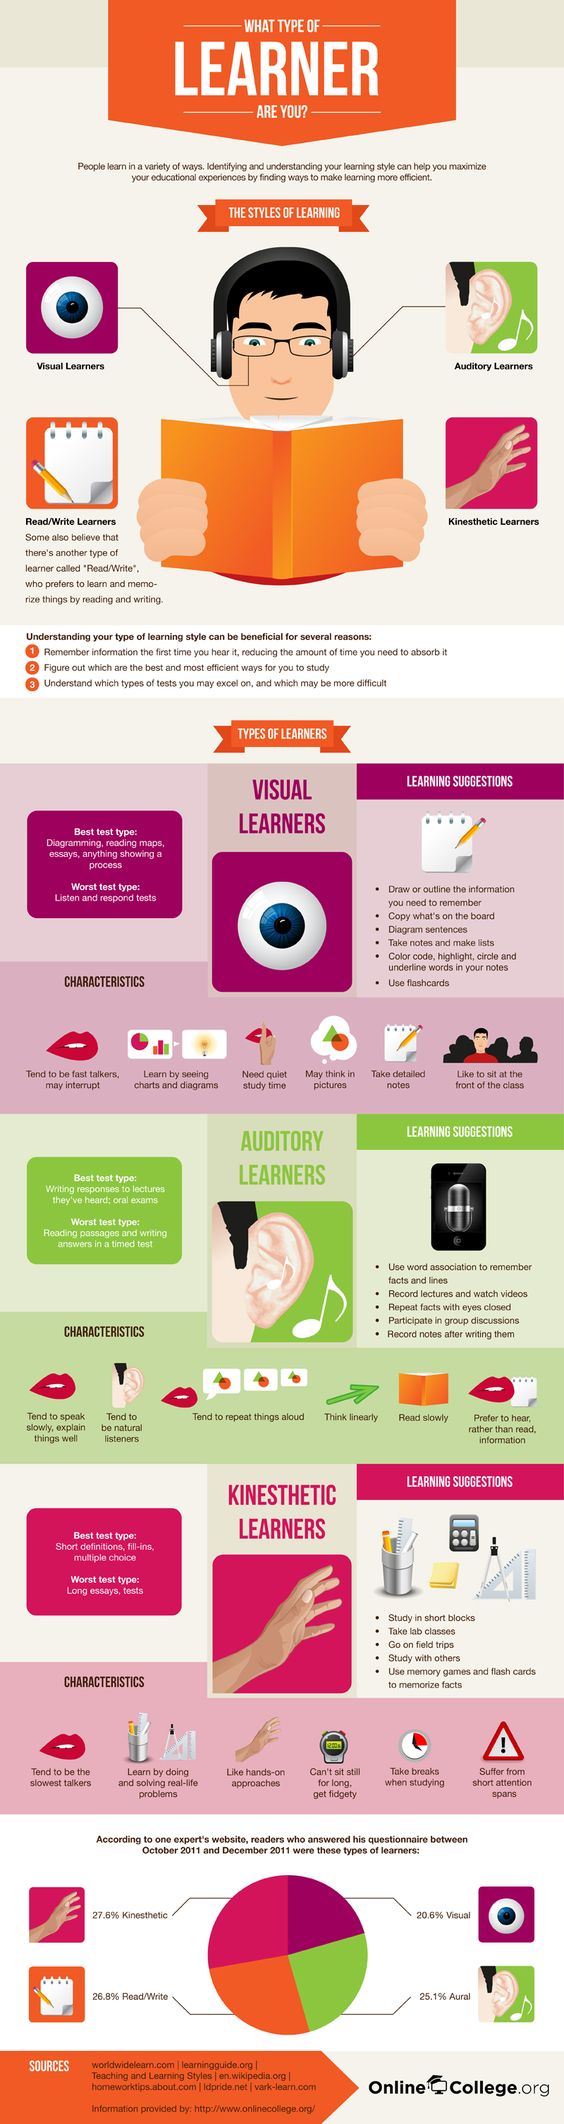 What Type of Learner Are You?